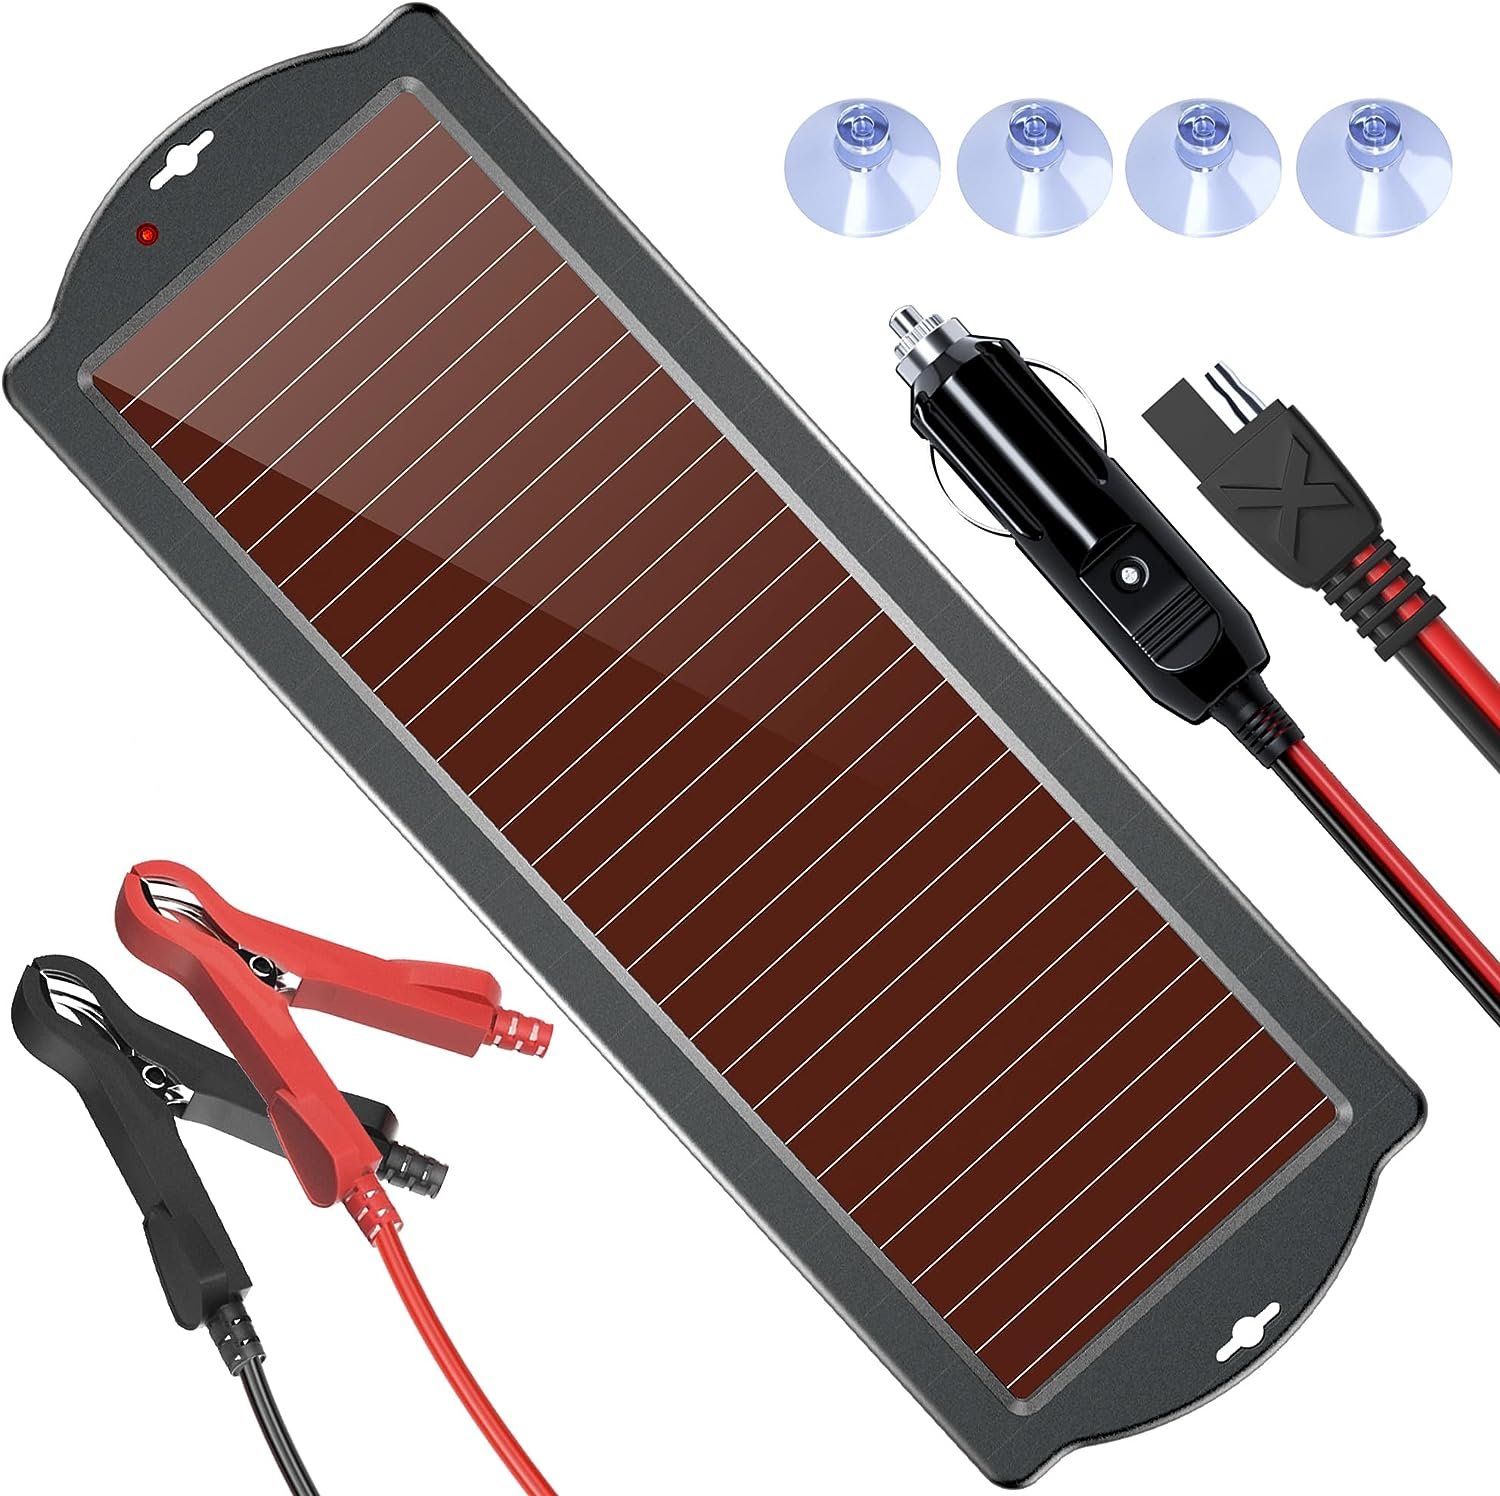 POWOXI 1.8W Solar Car Battery Charger Review